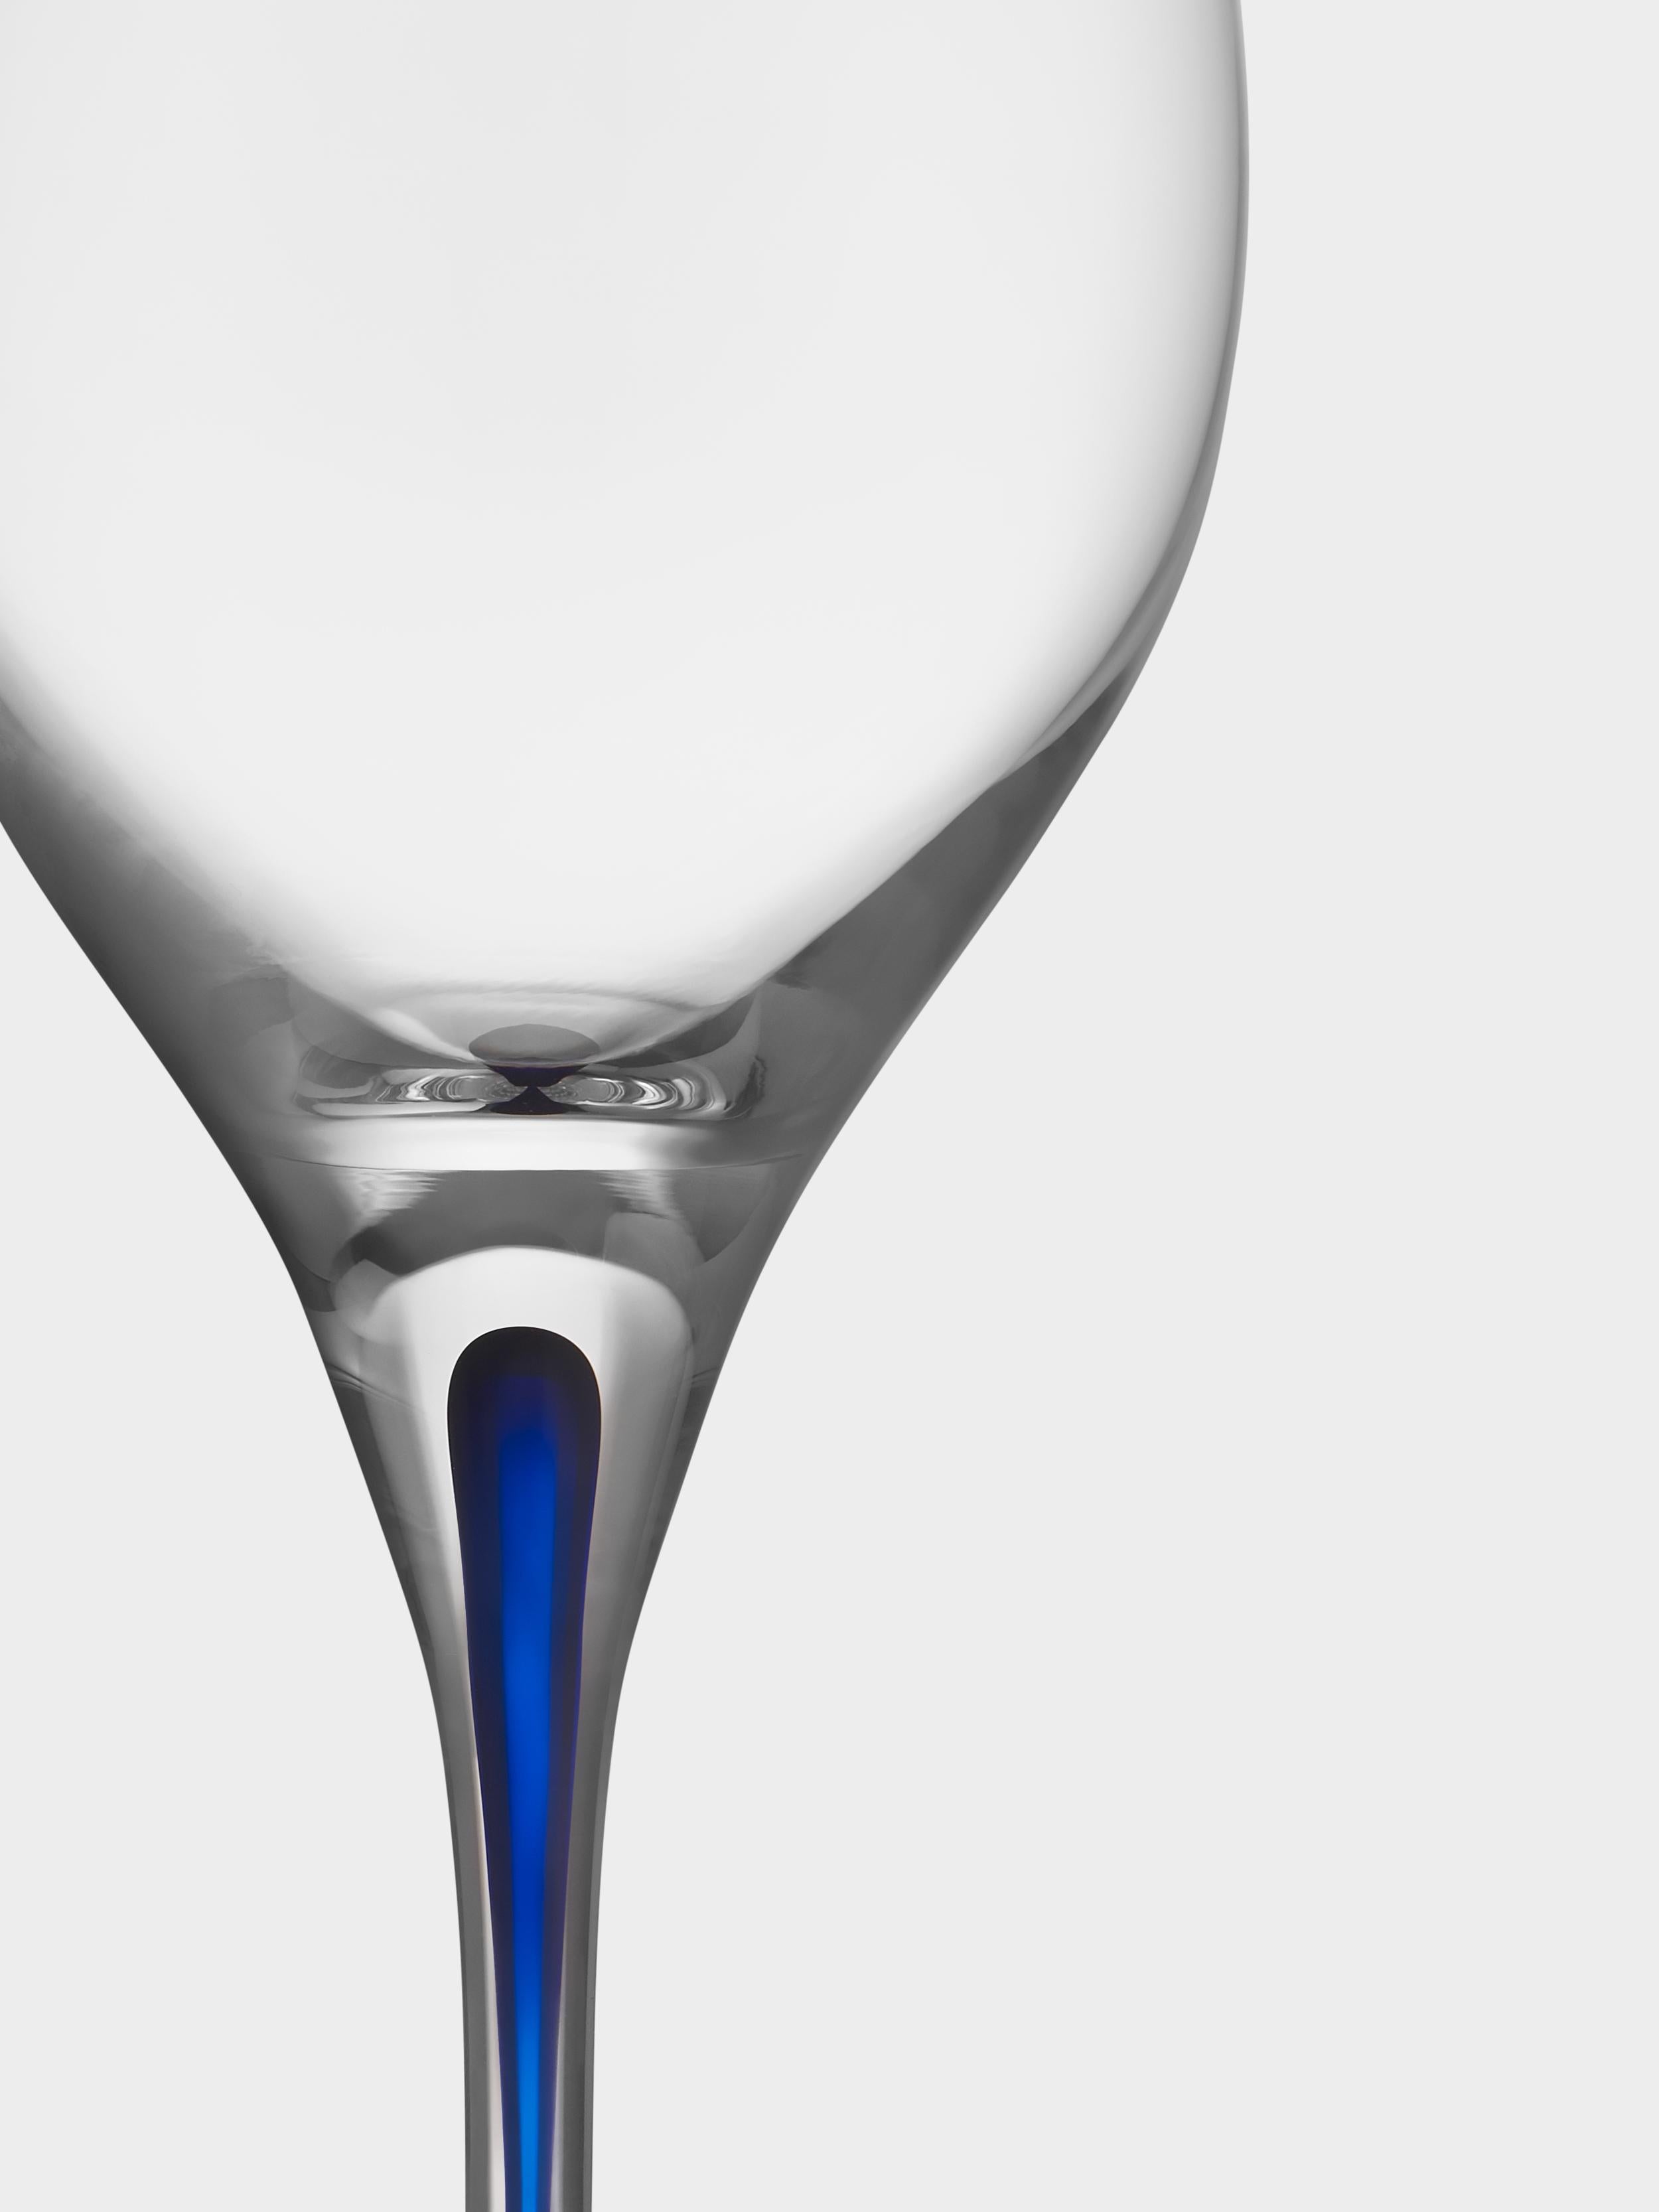 Intermezzo Balance from Orrefors was designed in 1984. The glass, which holds 14 oz, suits all kinds of wine, including white, red, and rosé. The tulip shape of the bowl brings out the flavors and aromas of the wine particularly well. Intermezzo